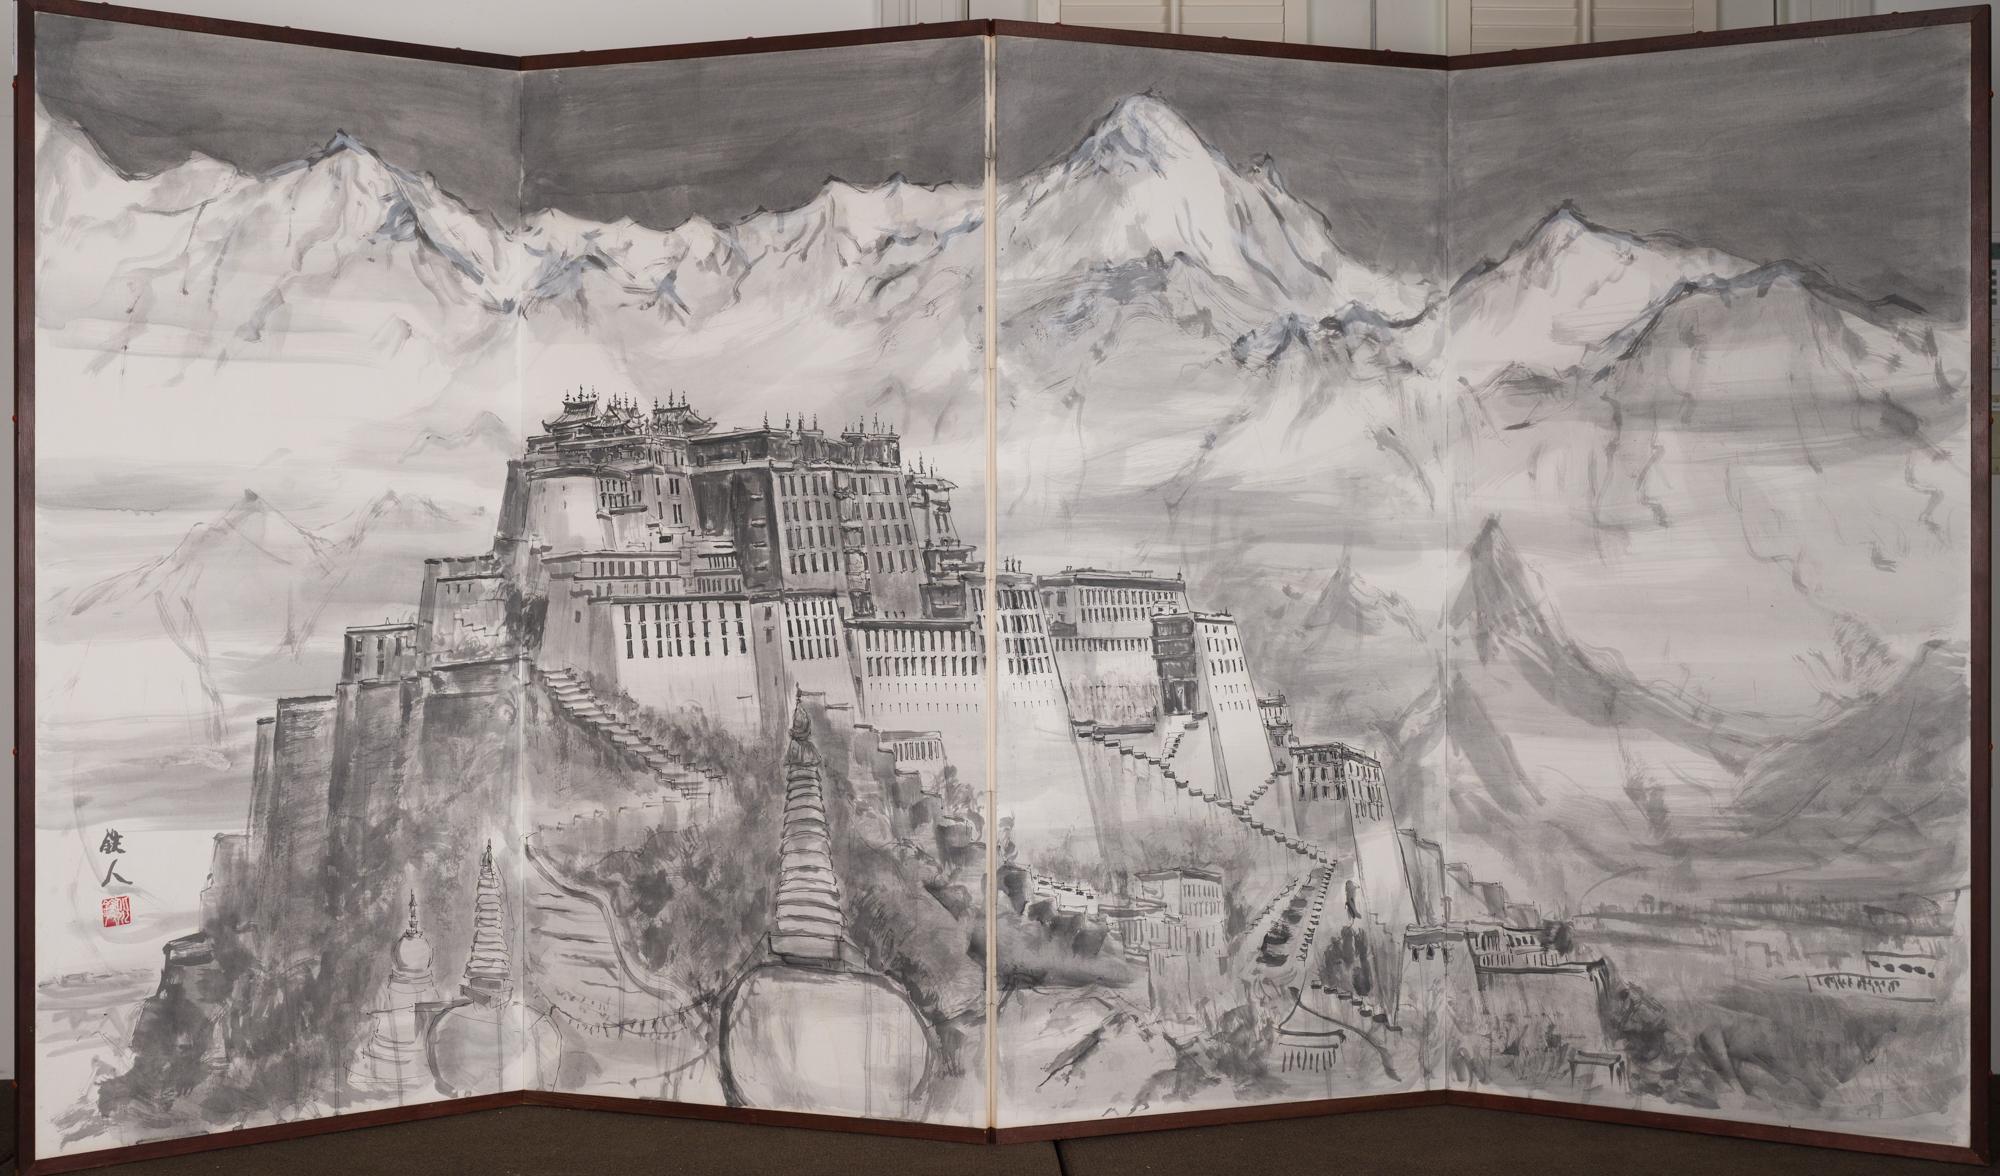 Powerful depiction of sprawling monastery with massive mountains in the background. Ink on paper. Signature and seal read: Tetsuzan.